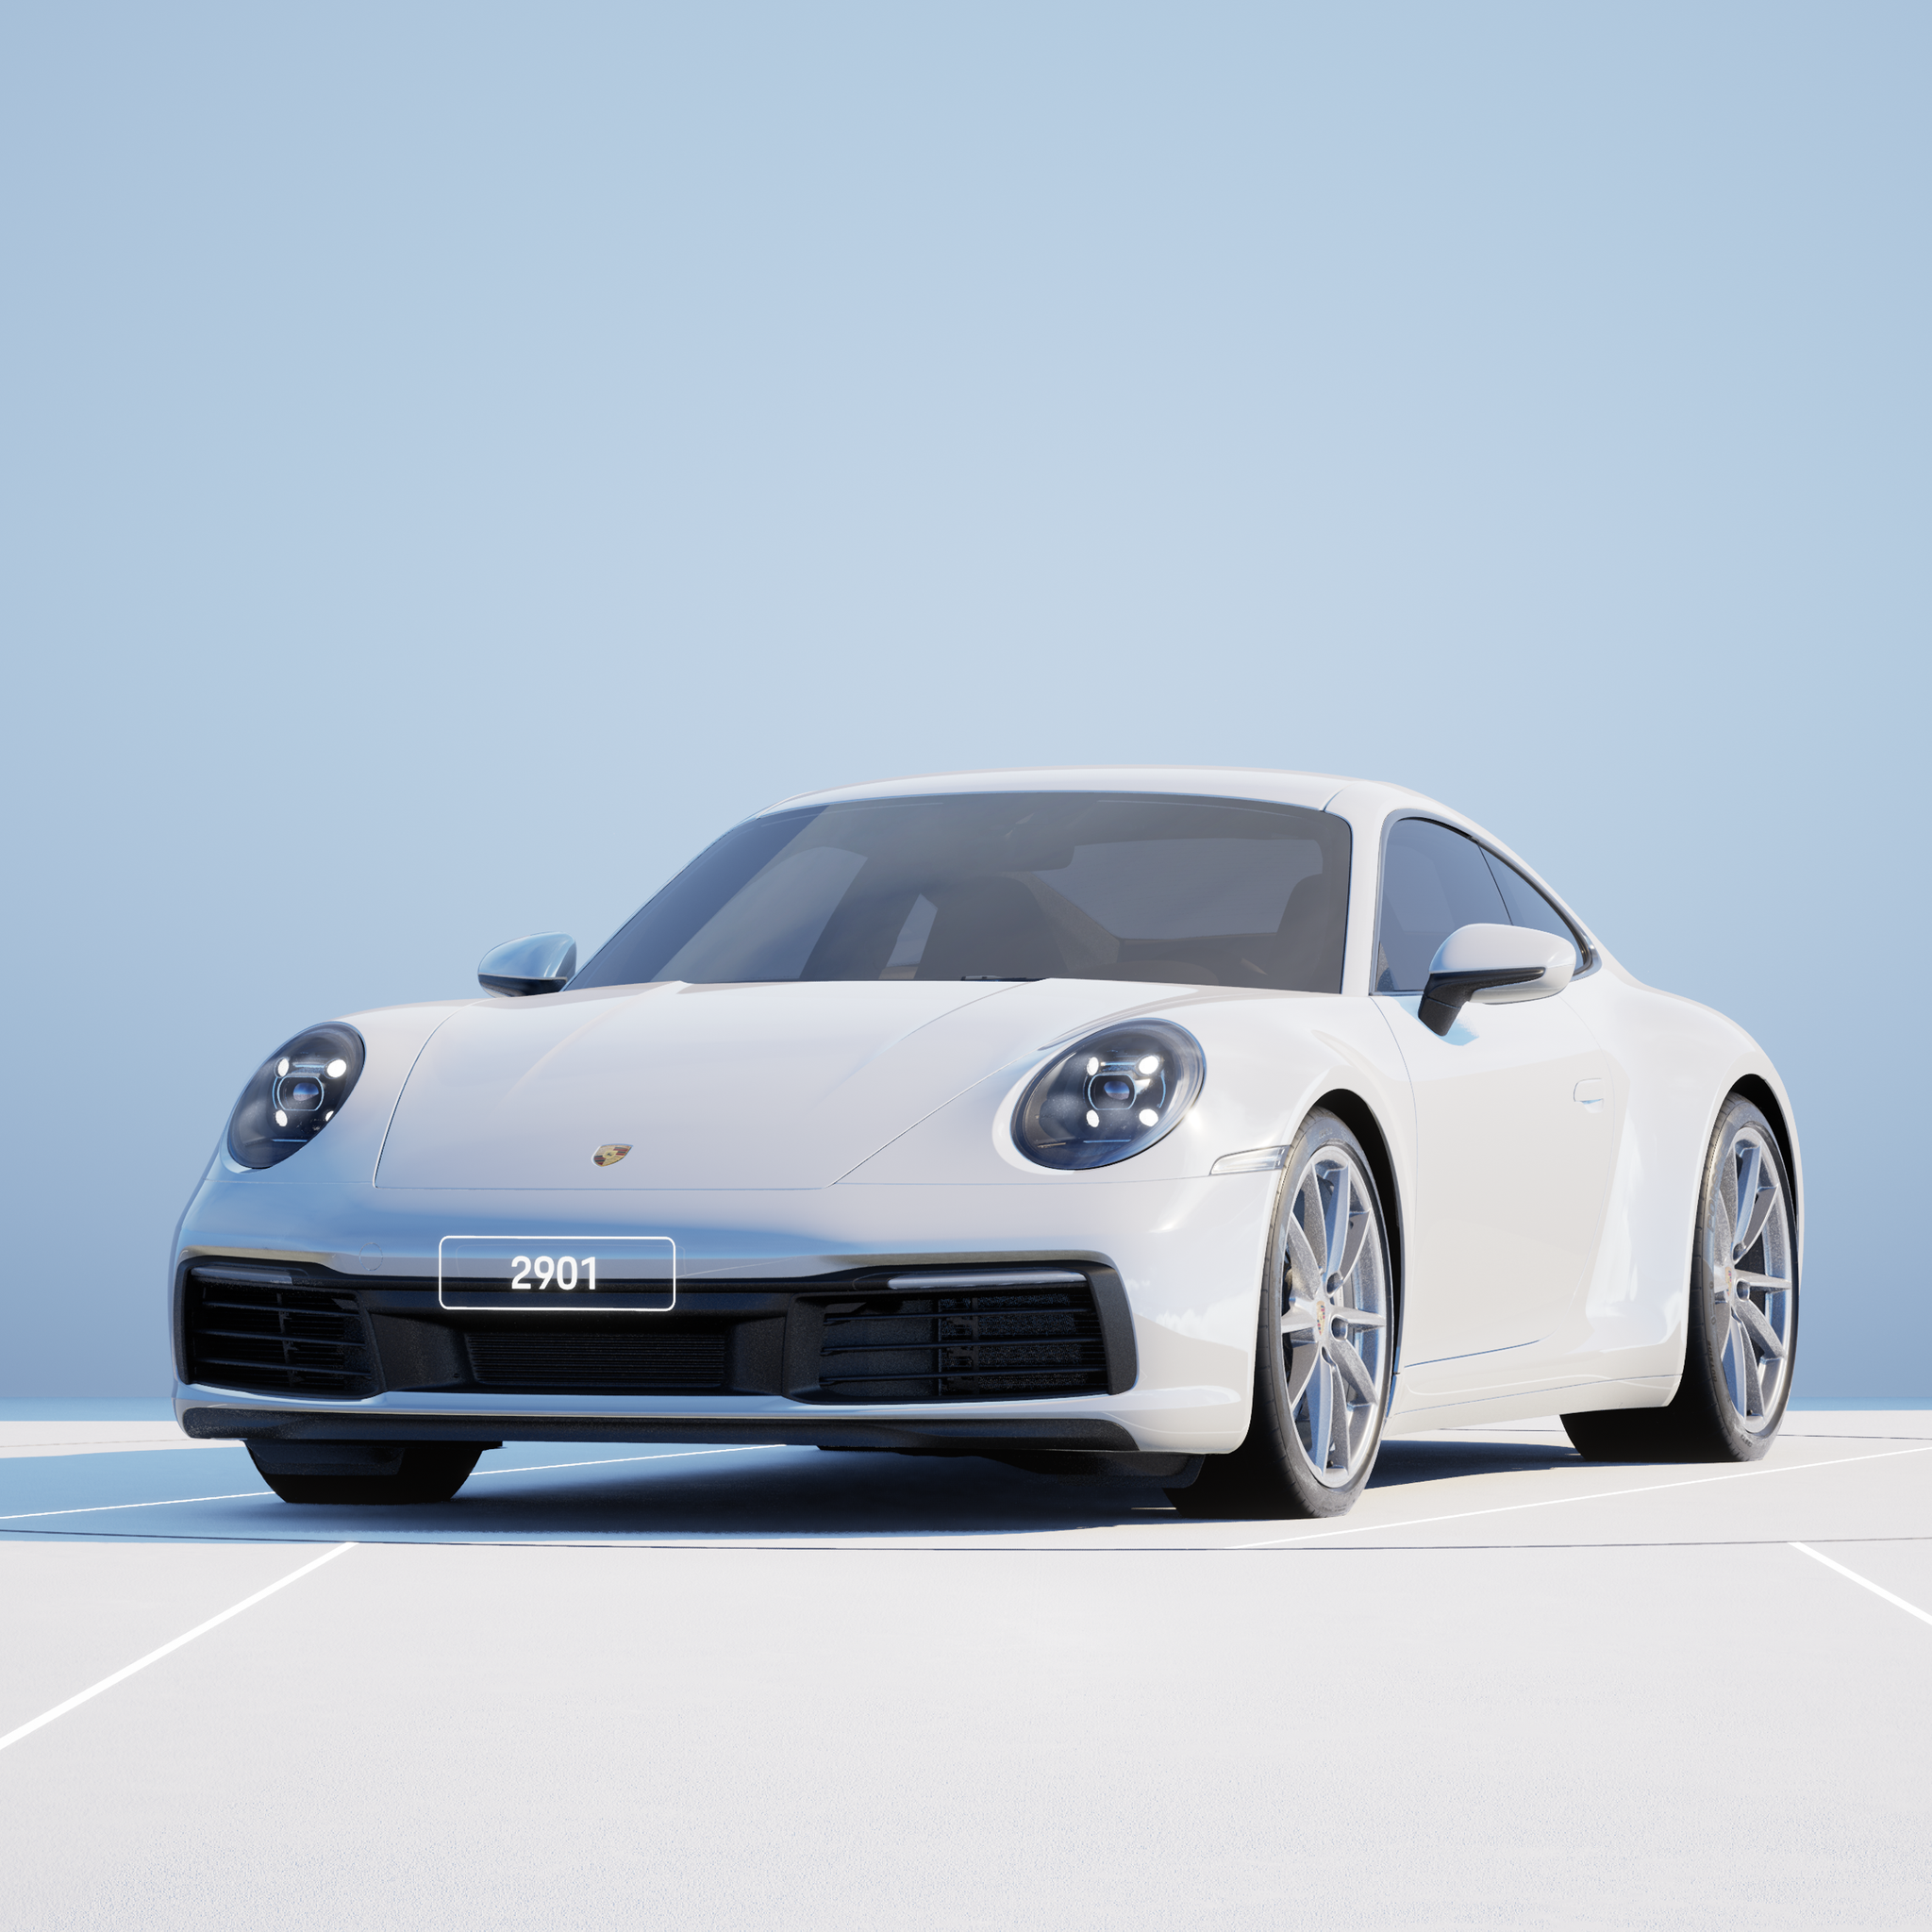 The PORSCHΞ 911 2901 image in phase